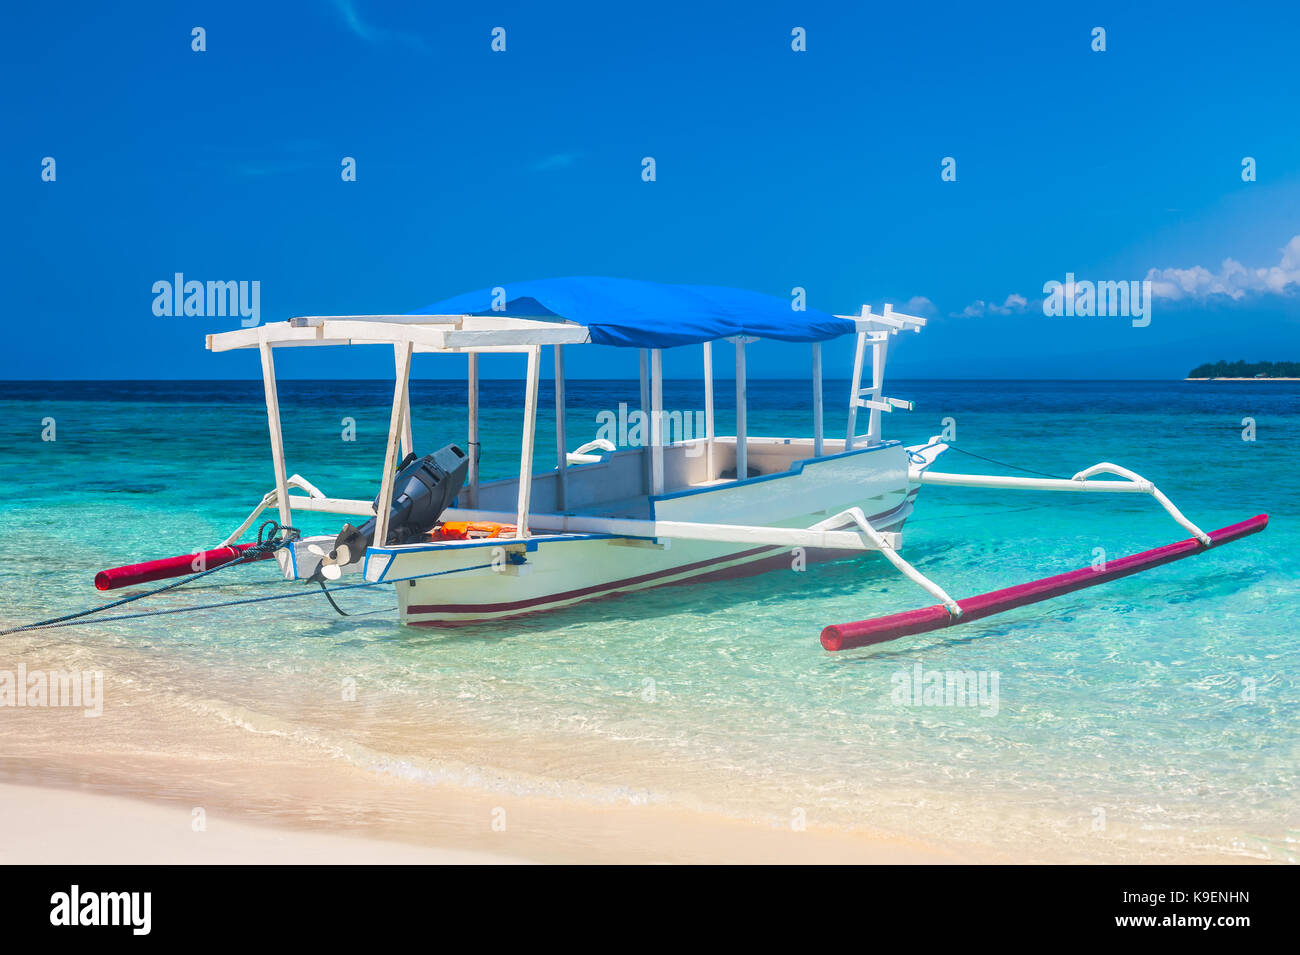 traditional Indonesia boat Jukung on a tropical beah Stock Photo